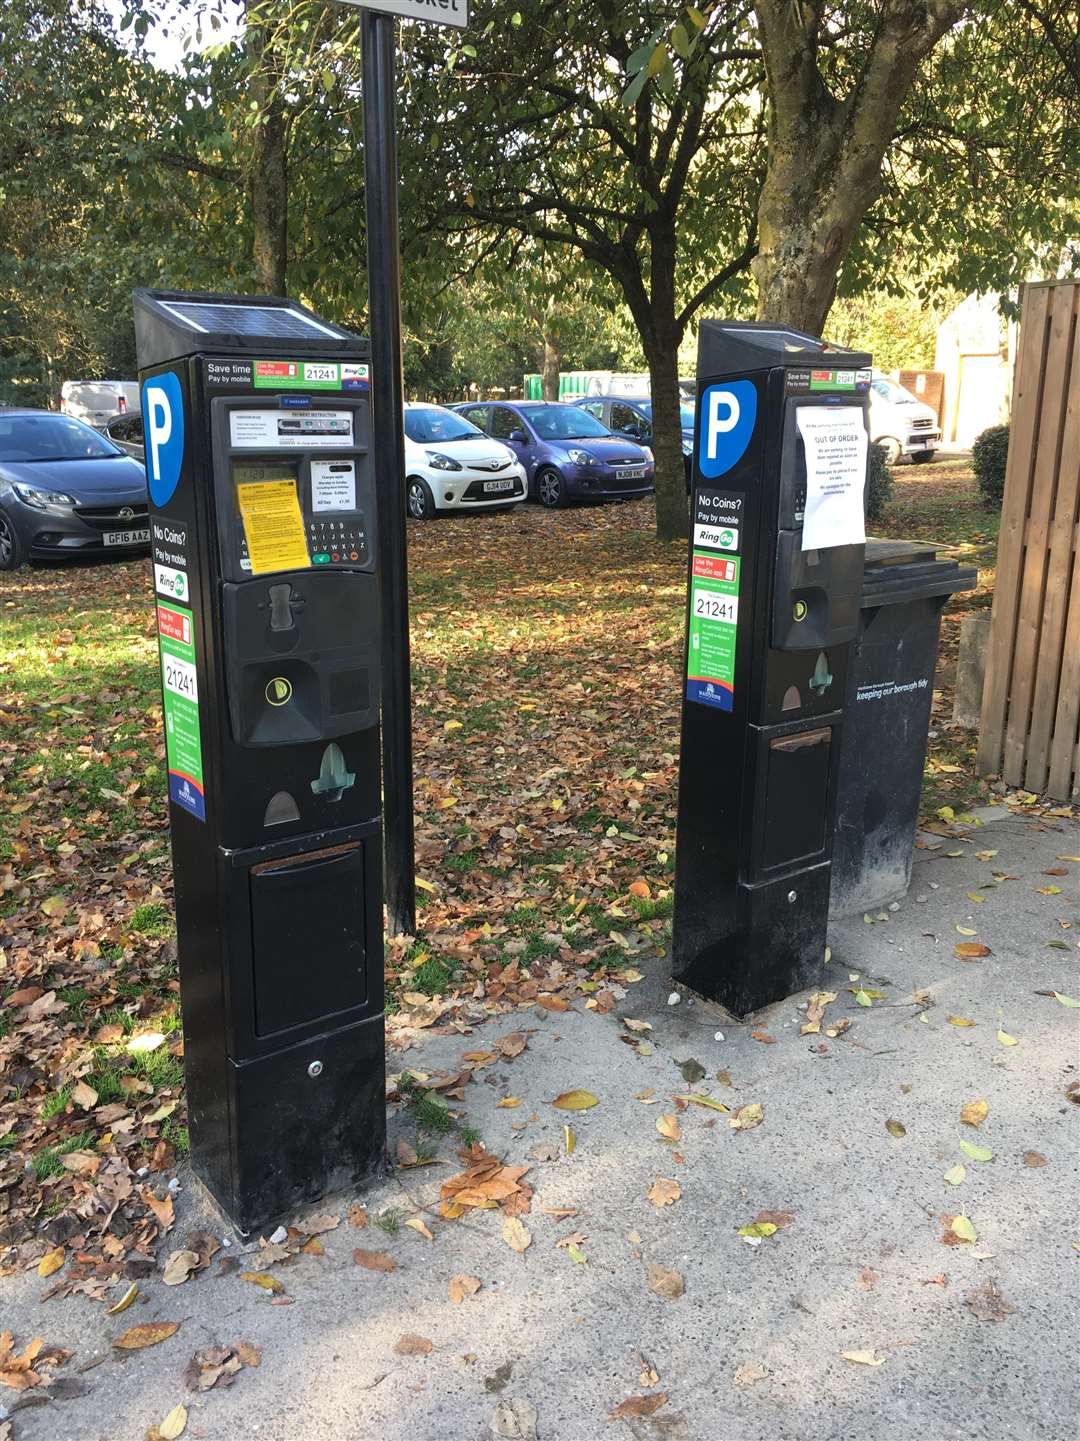 Two of the three parking meters currently broken at Cobtree Manor Park (5023600)